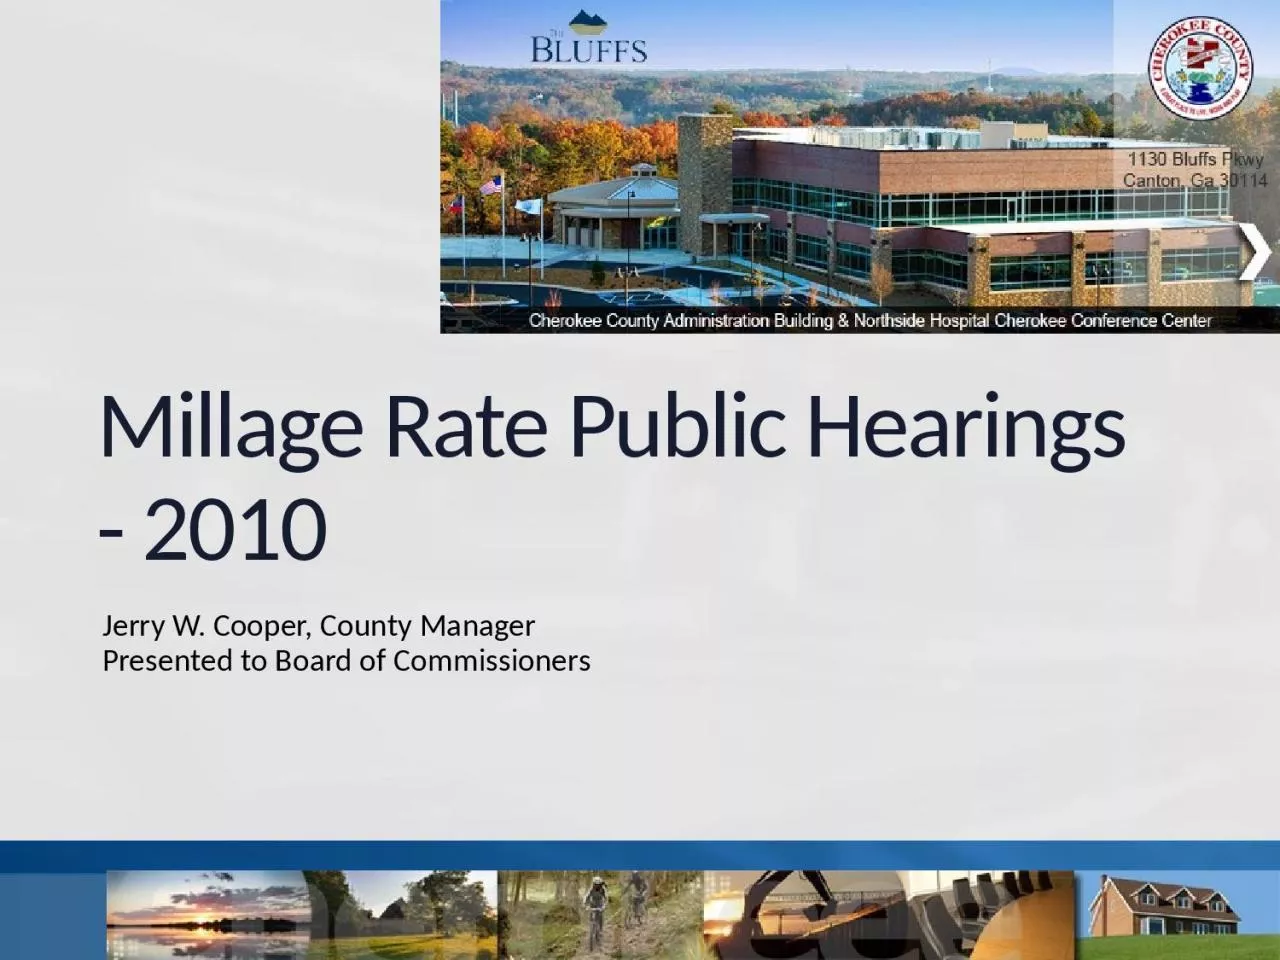 Millage Rate Public Hearings - 2010